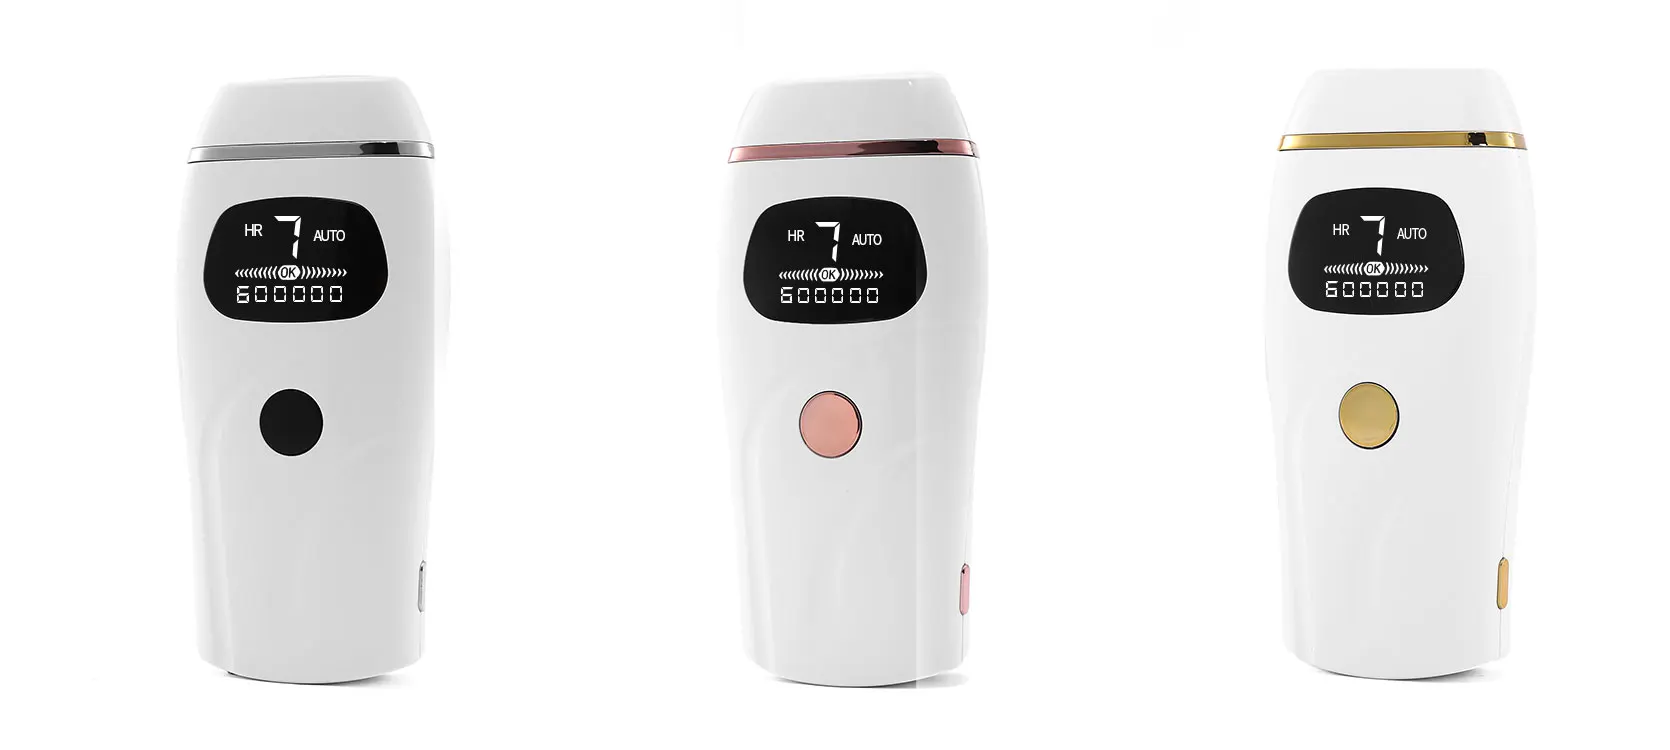 electrolysis vs IPL laser hair removal rechargecable epilator home use